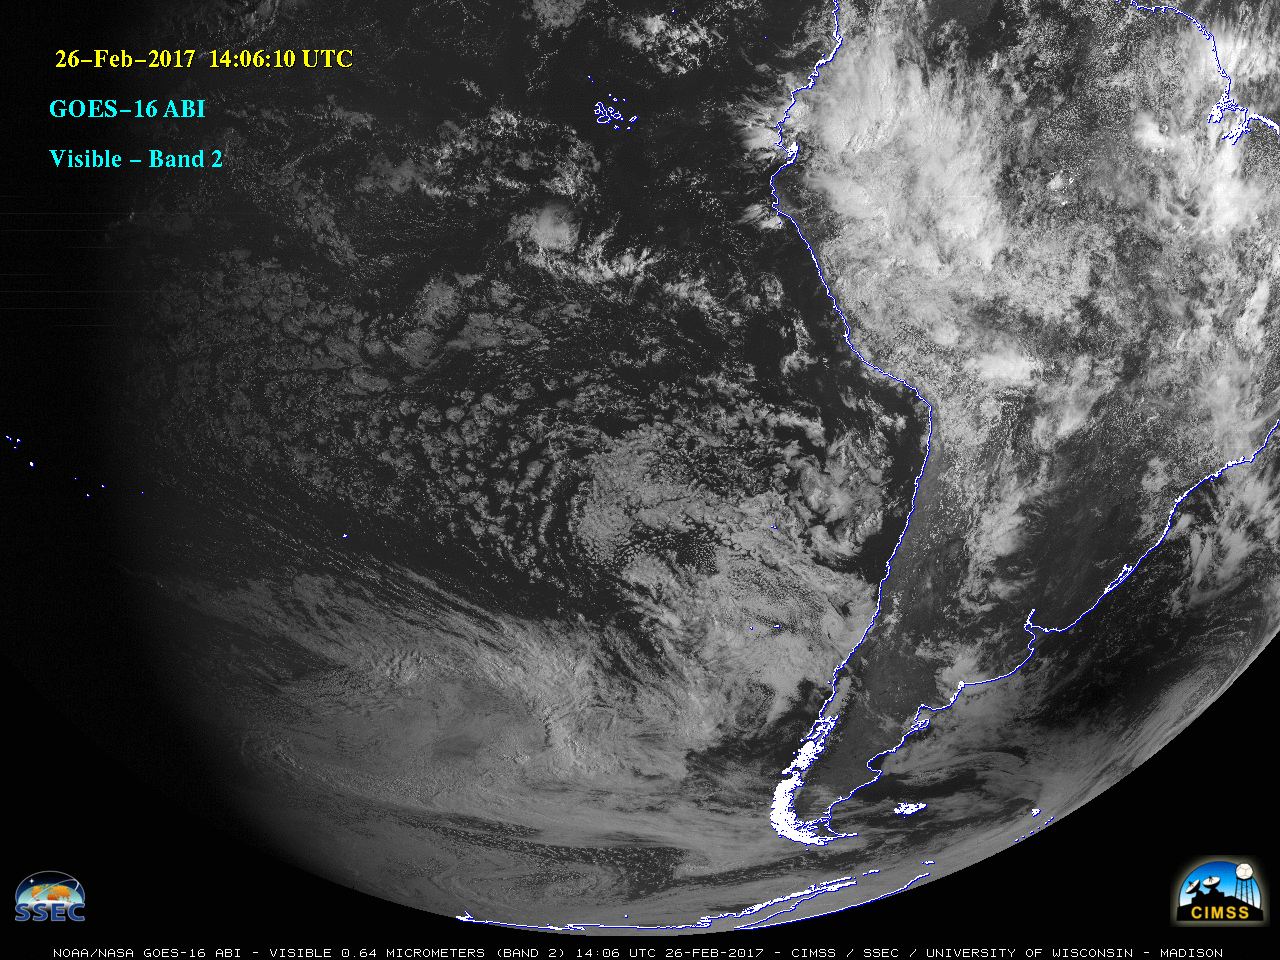 GOES-16 ABI Visible (0.64 µm) images [click to play animation]